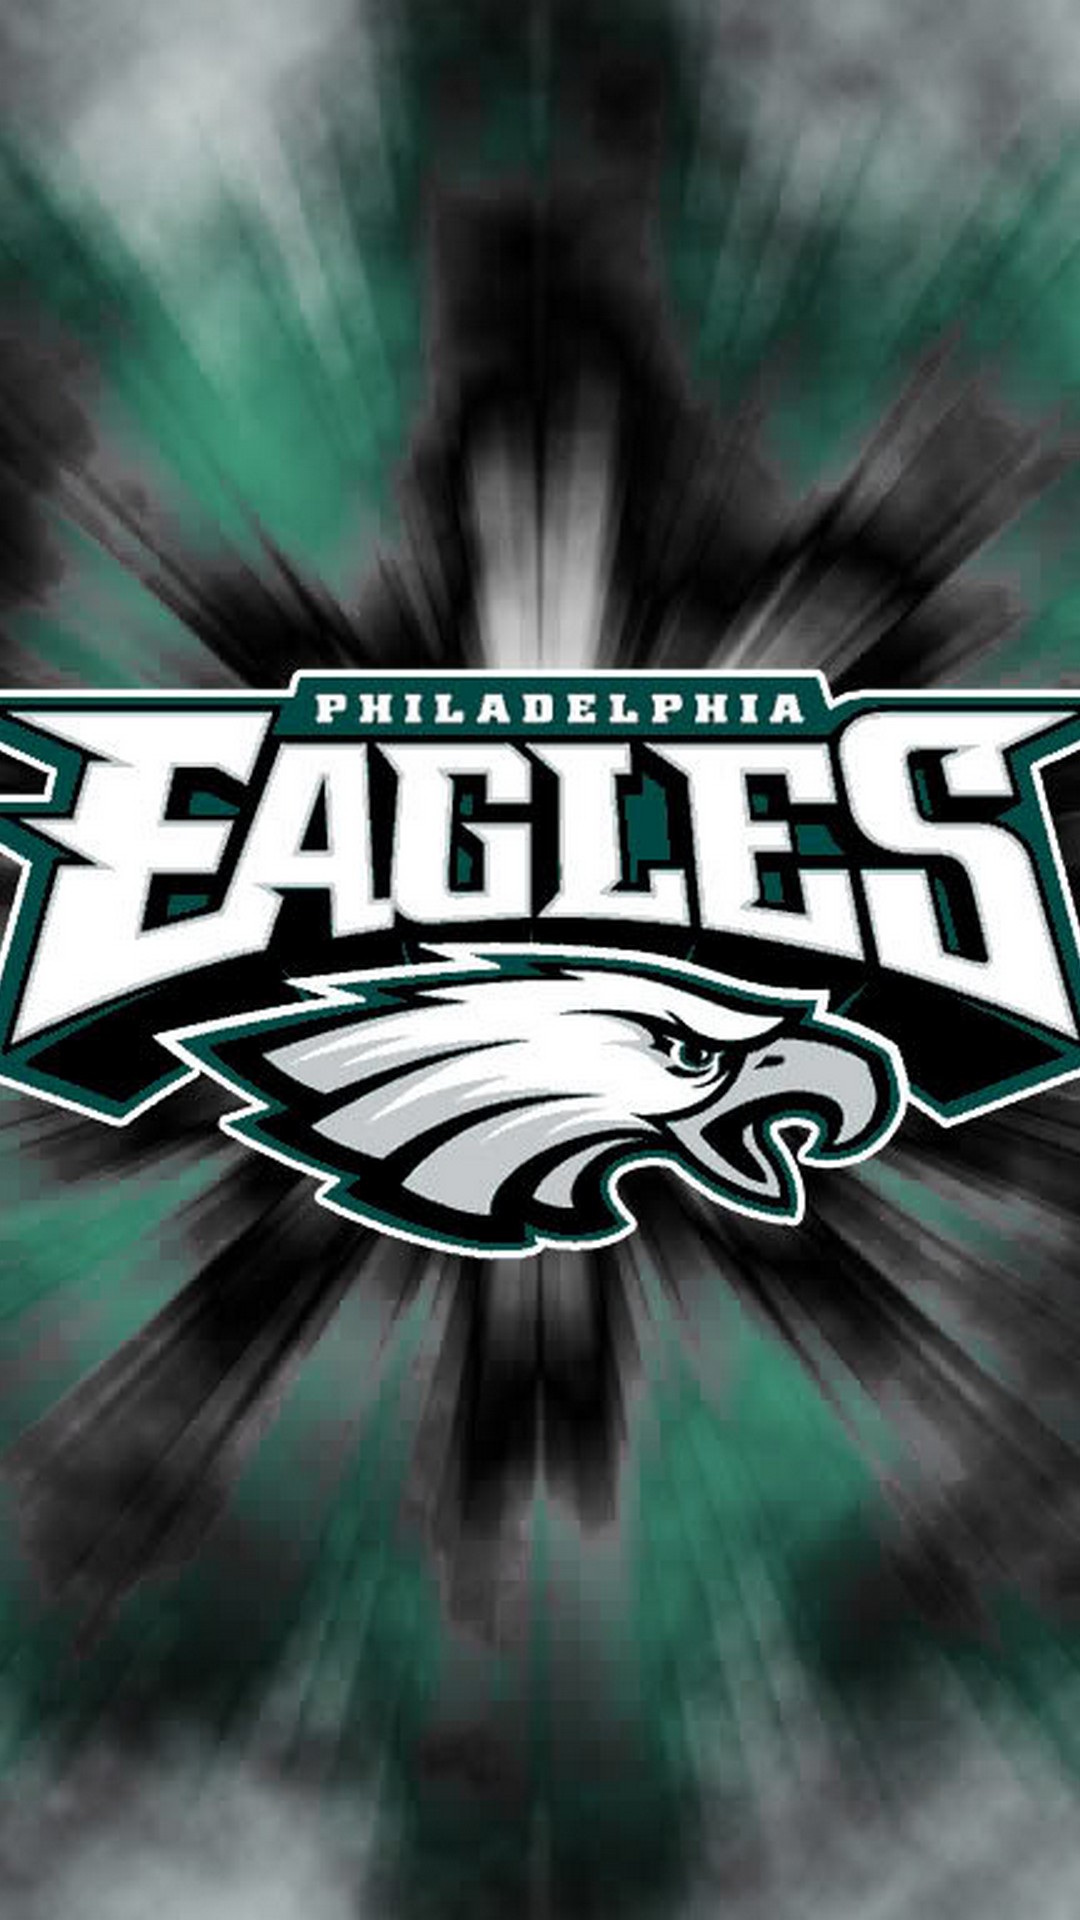 The Eagles HD Wallpaper For iPhone Nfl Football